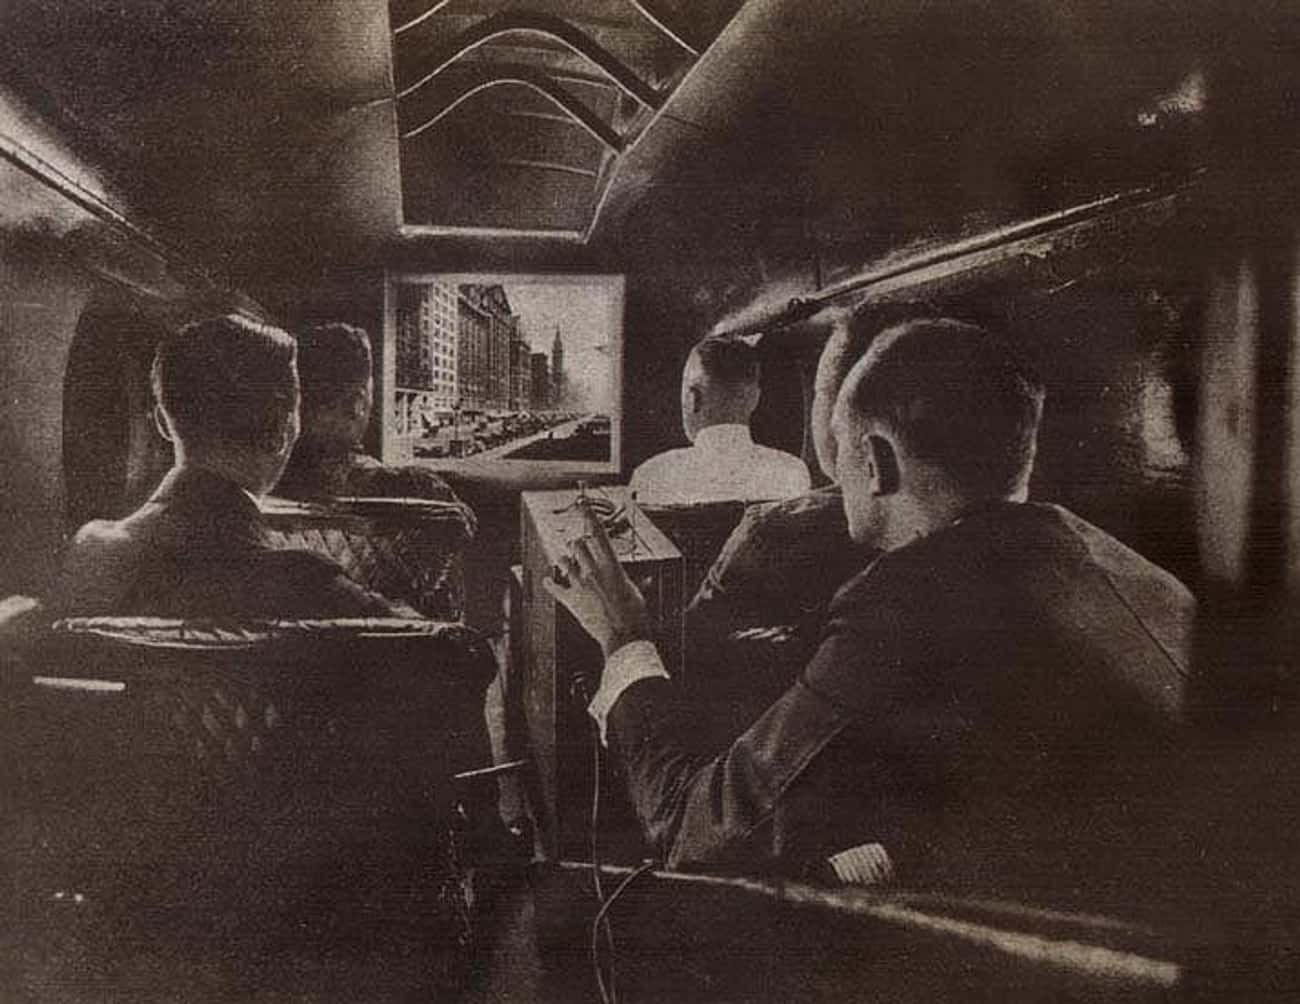 Everyone Watched In-Flight Movies Together